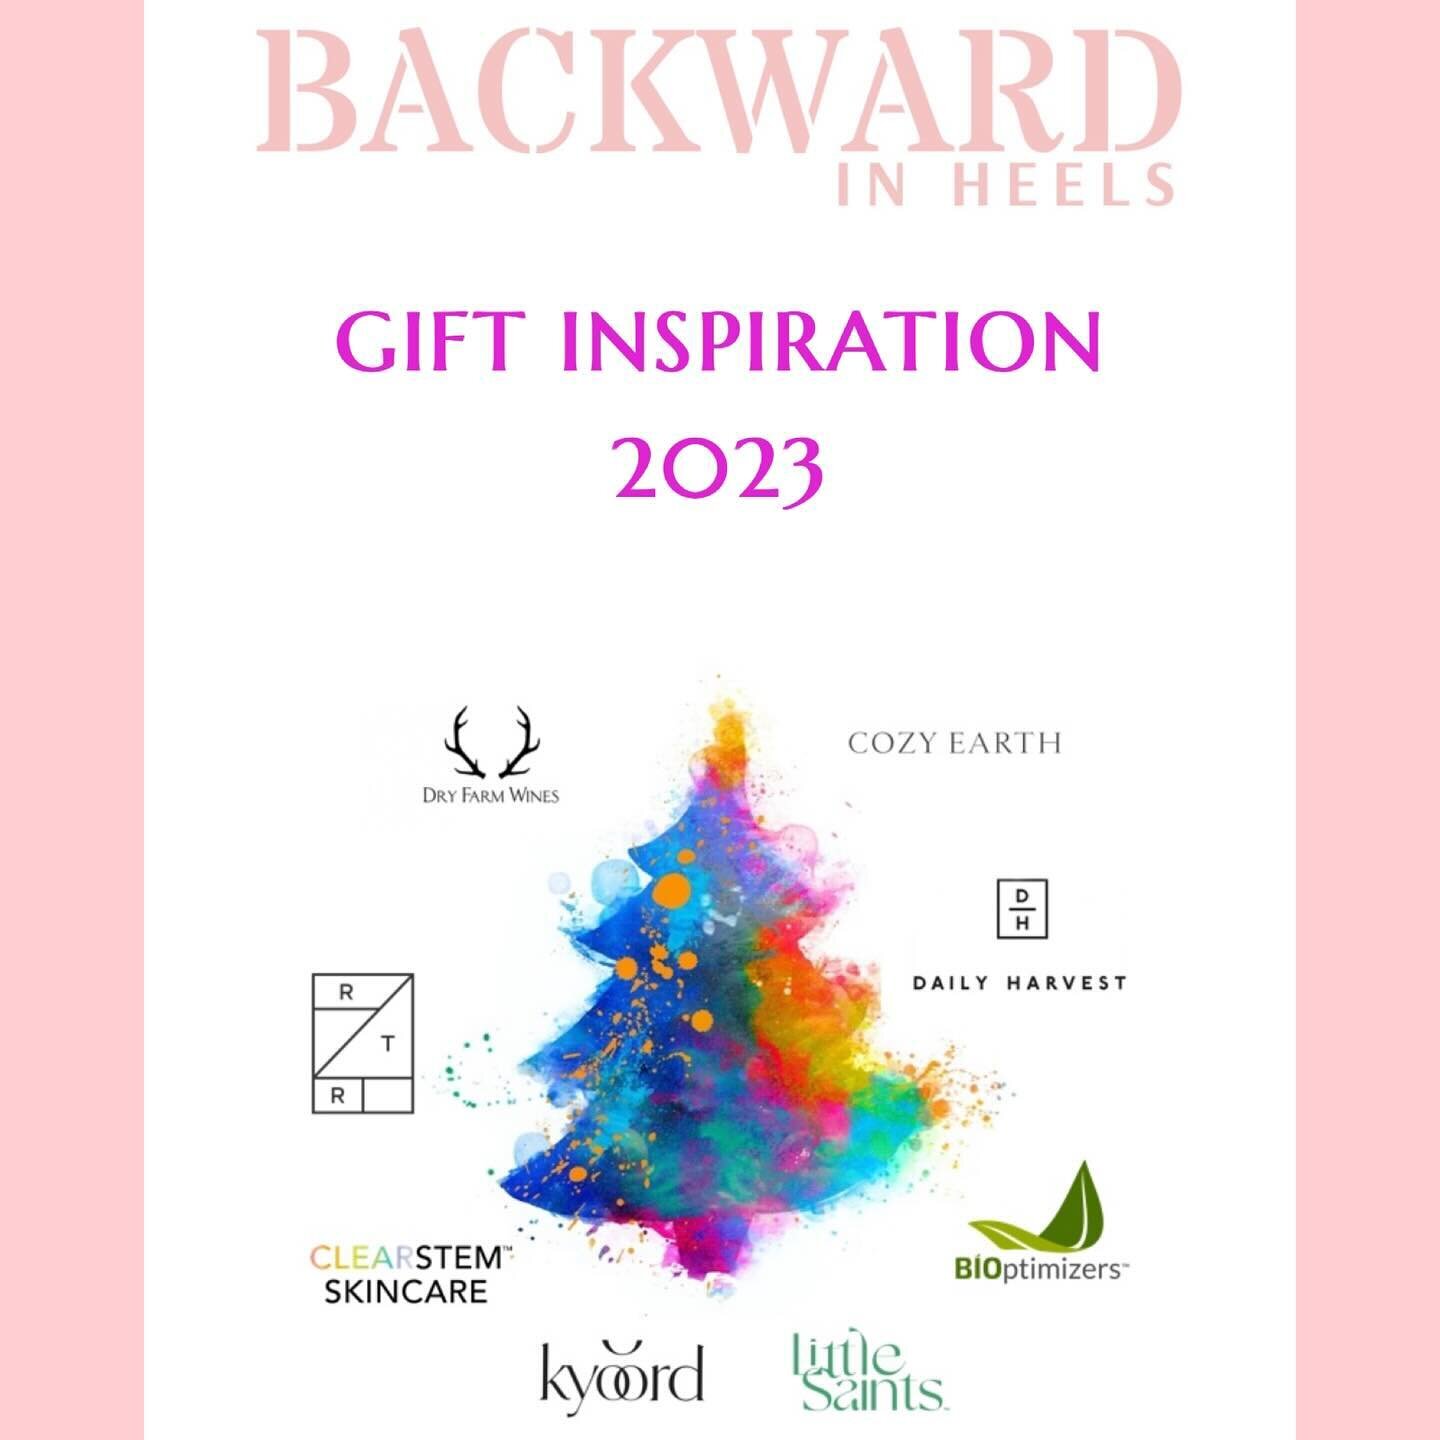 Embarking on the holiday season with a spirit of giving, I&rsquo;ve compiled a collection of beloved brands that have become integral to my daily routine. Exclusively for my Backward In Heels community, I&rsquo;ve secured special discounts on these f